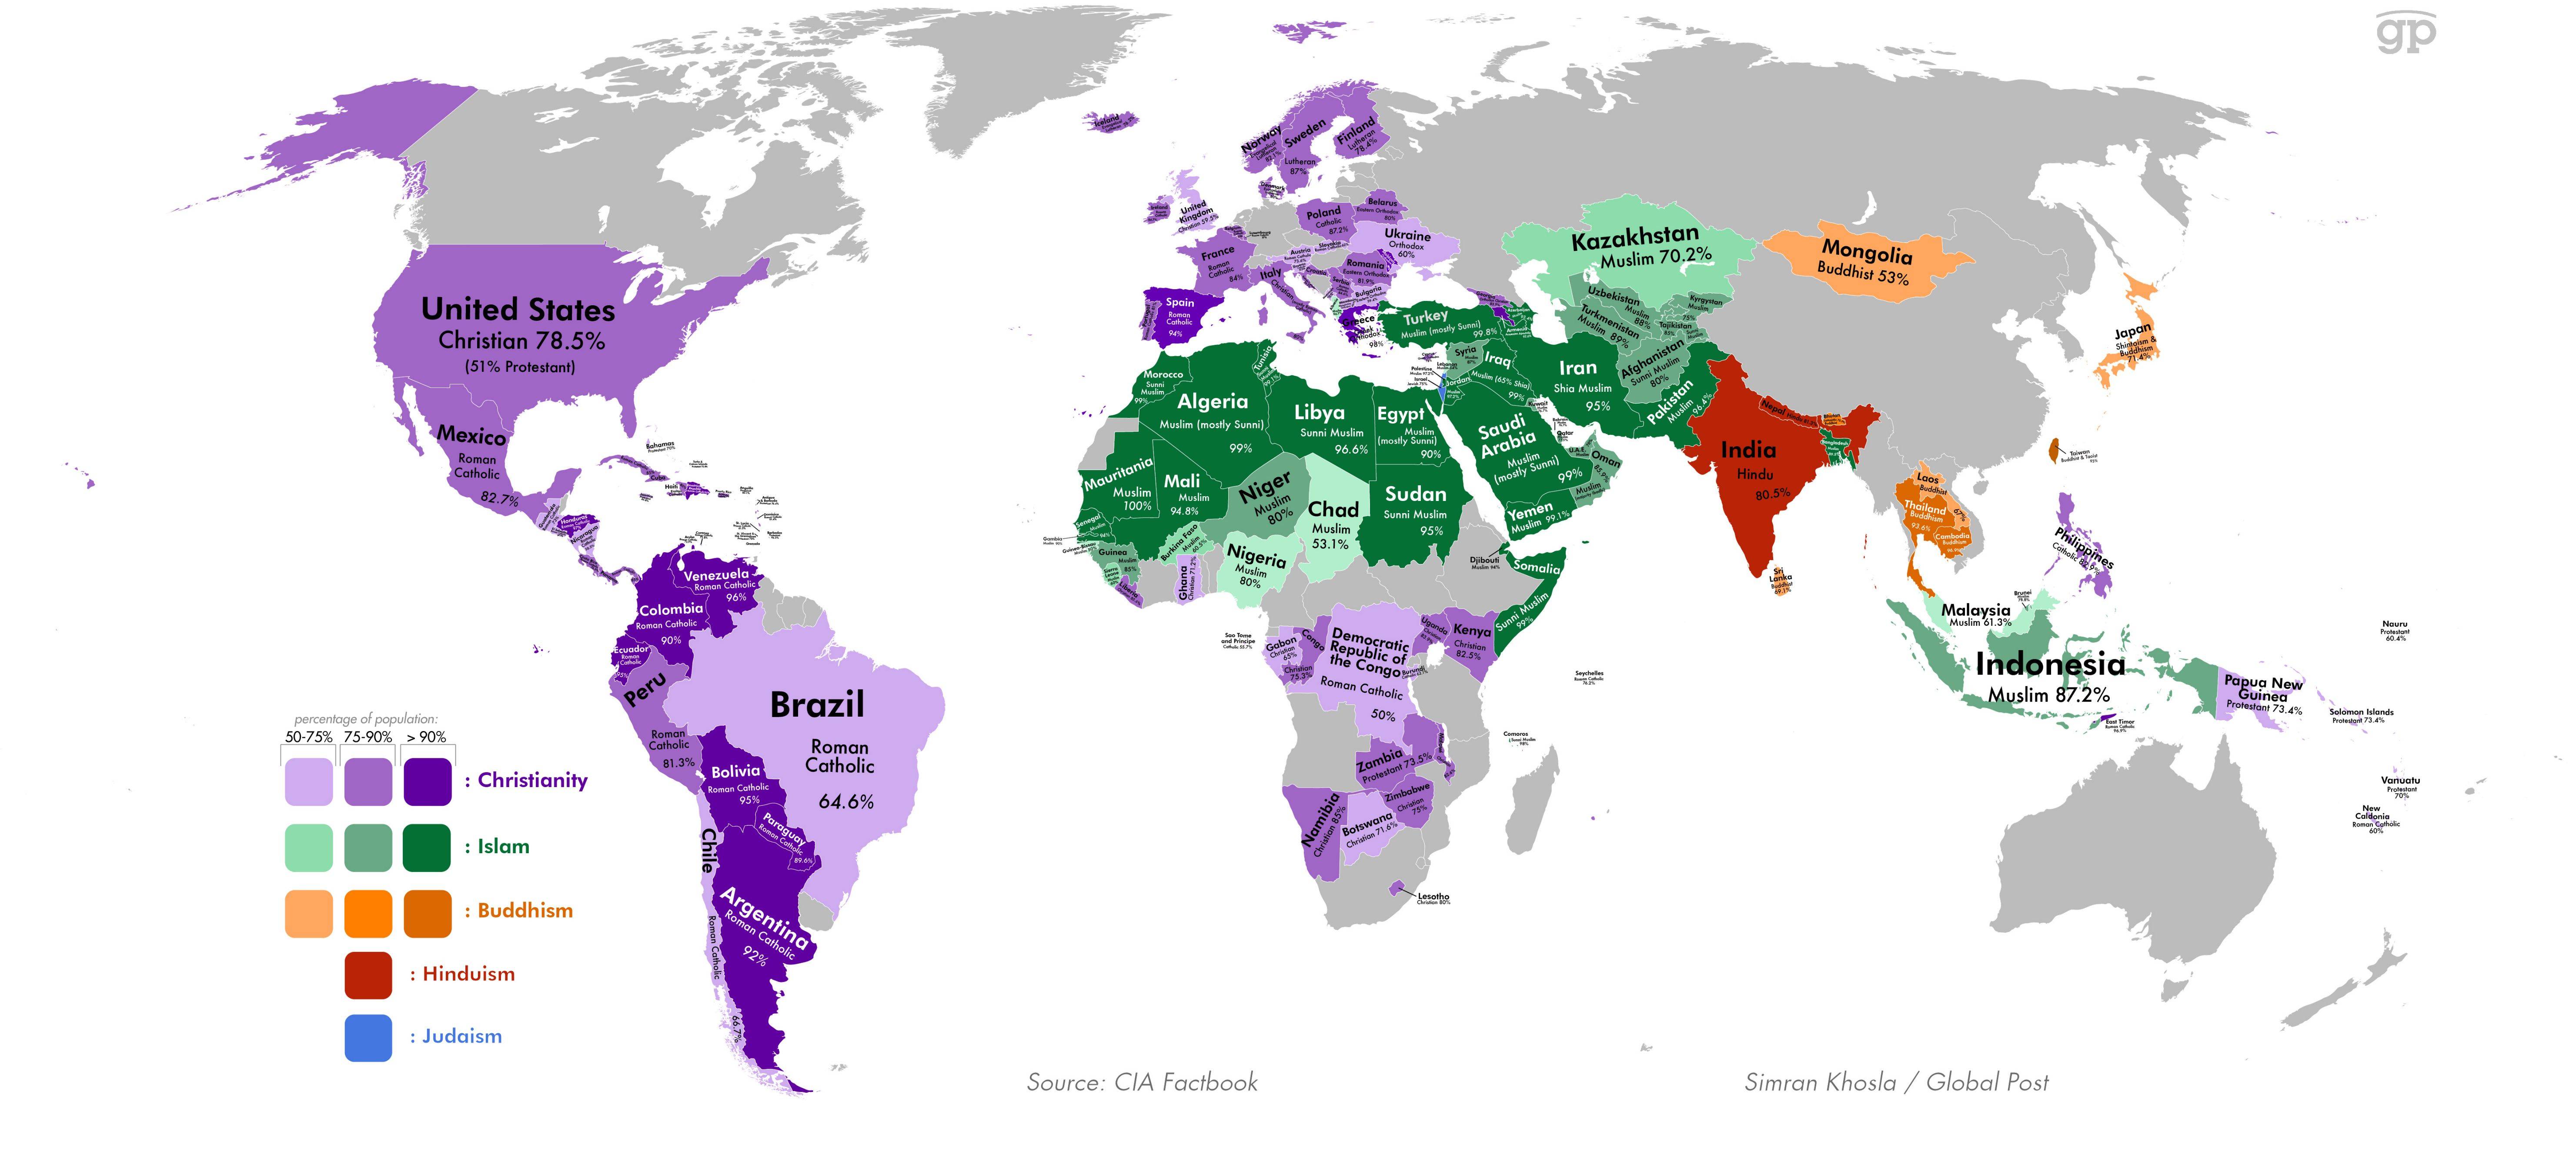 world-map-of-religions-george-g-coe